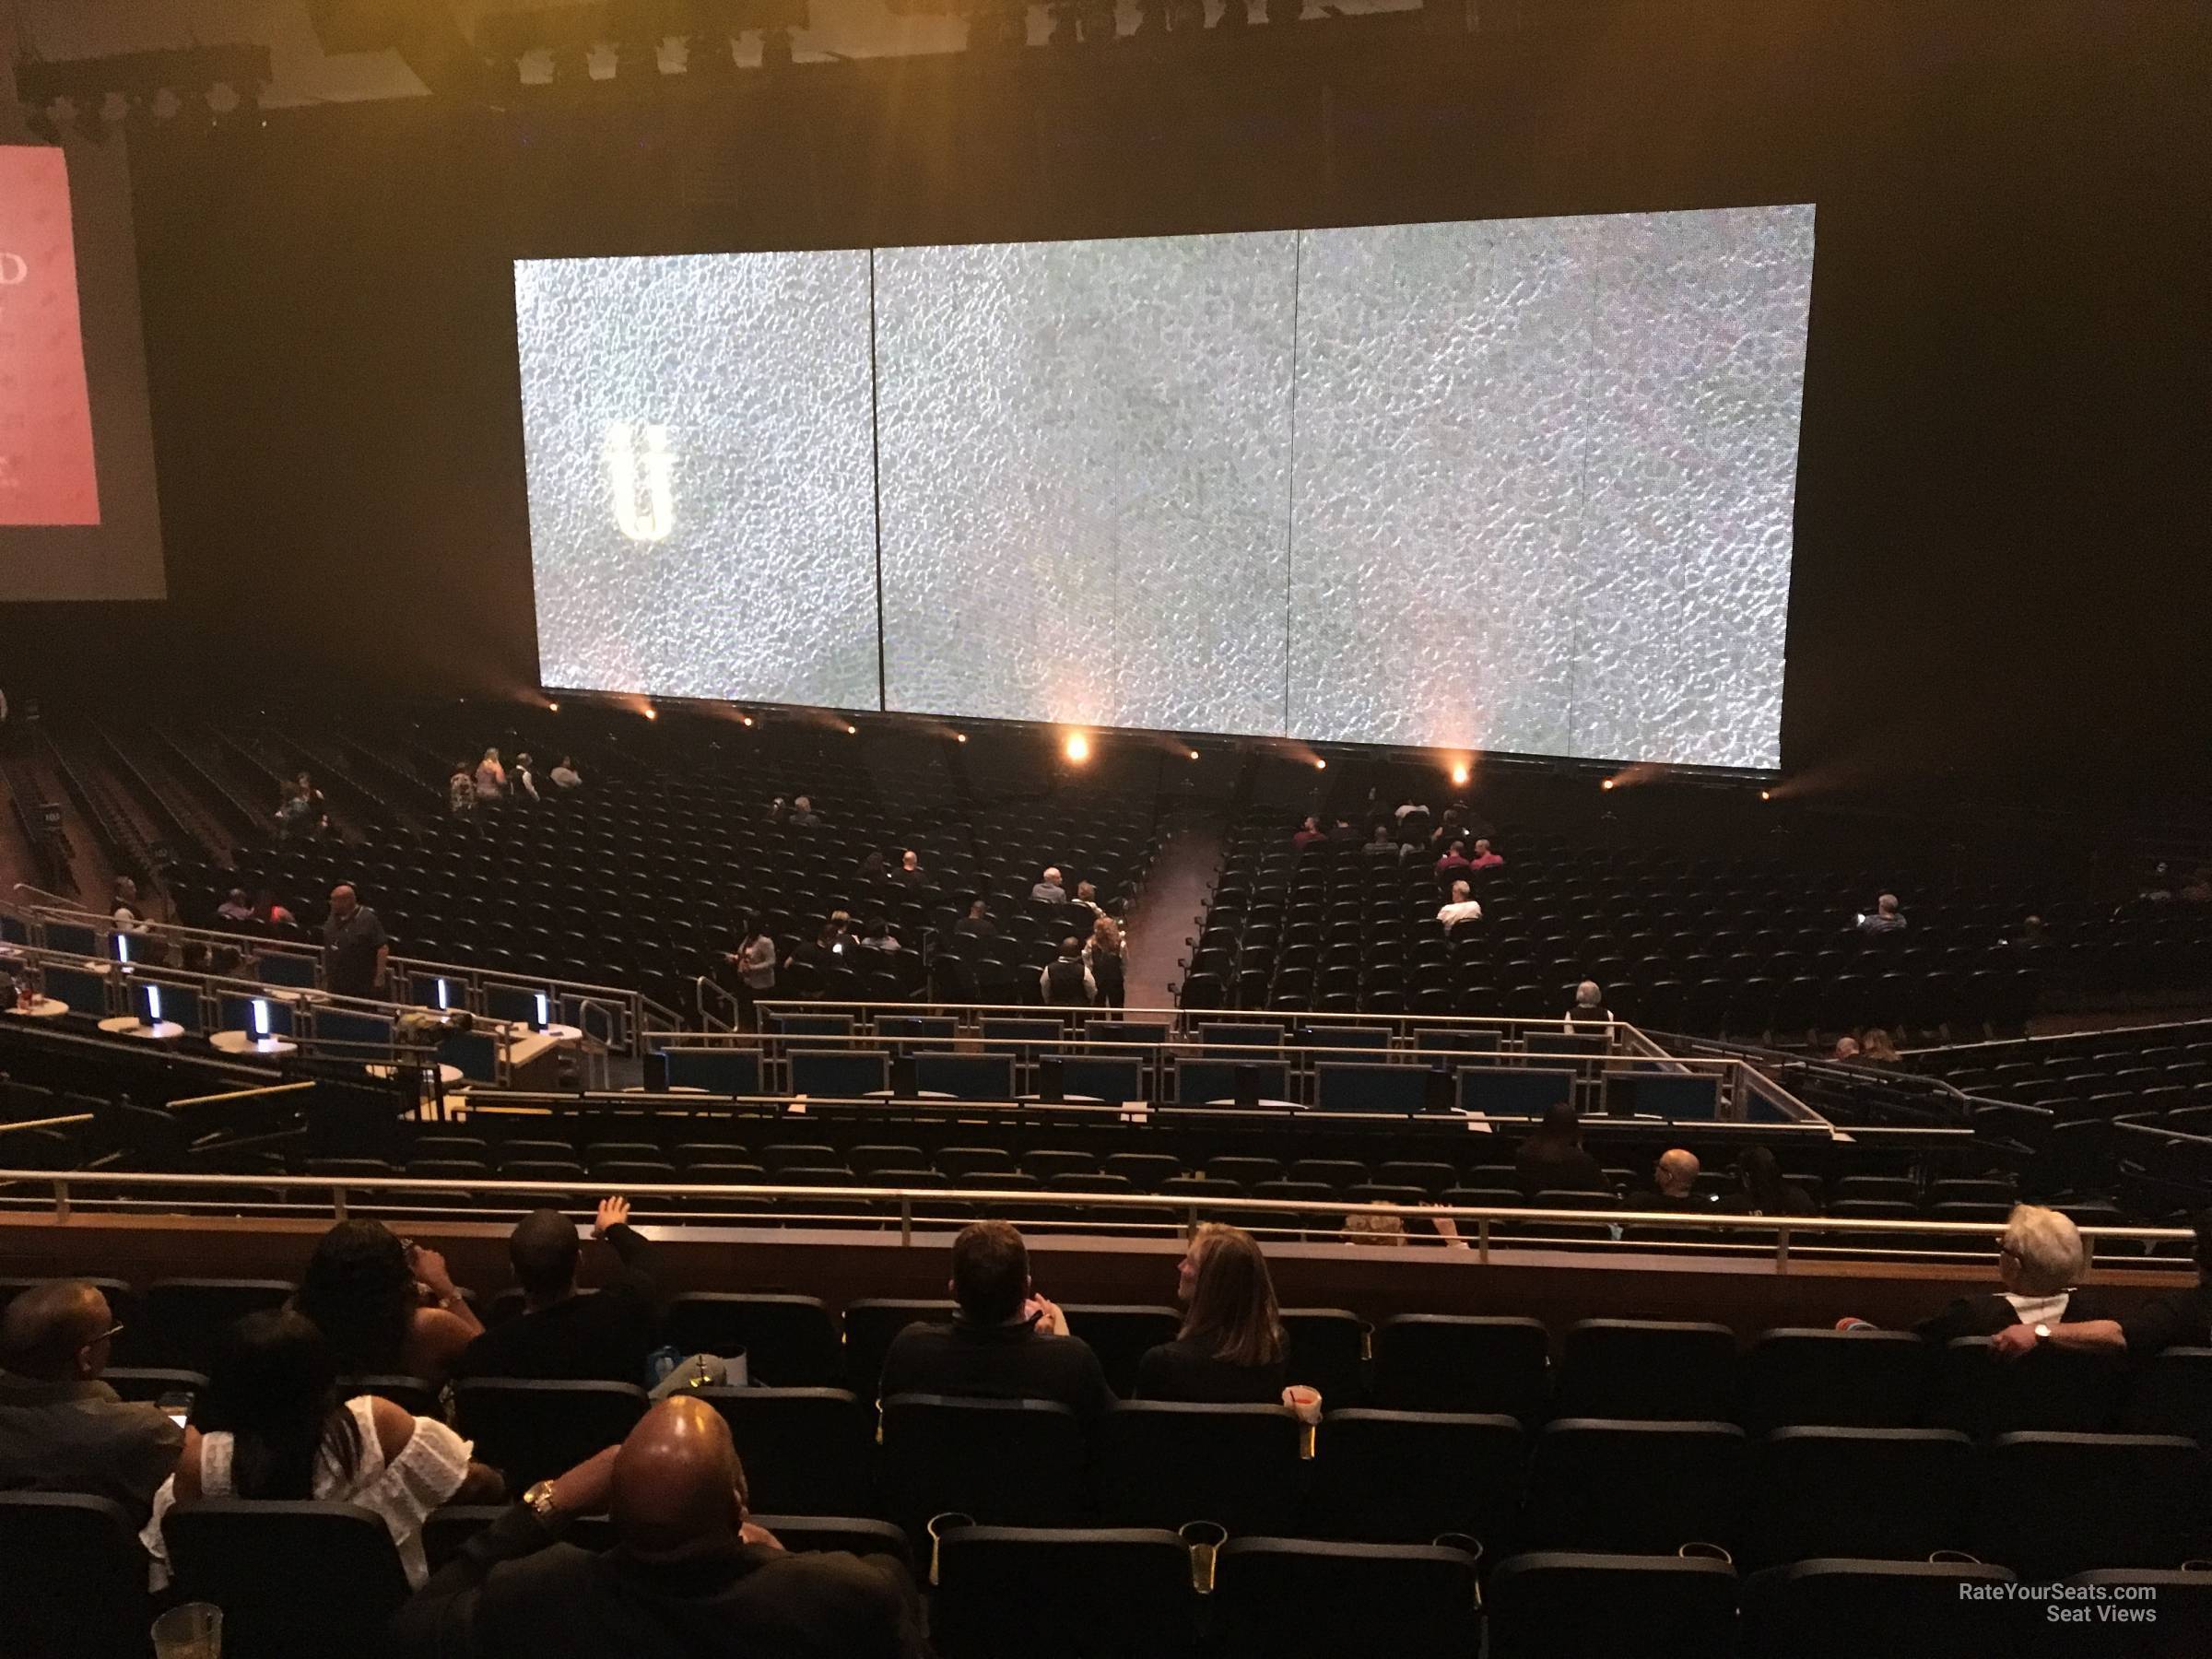 Park Theater Mgm Seating Chart With Seat Numbers Ewqage